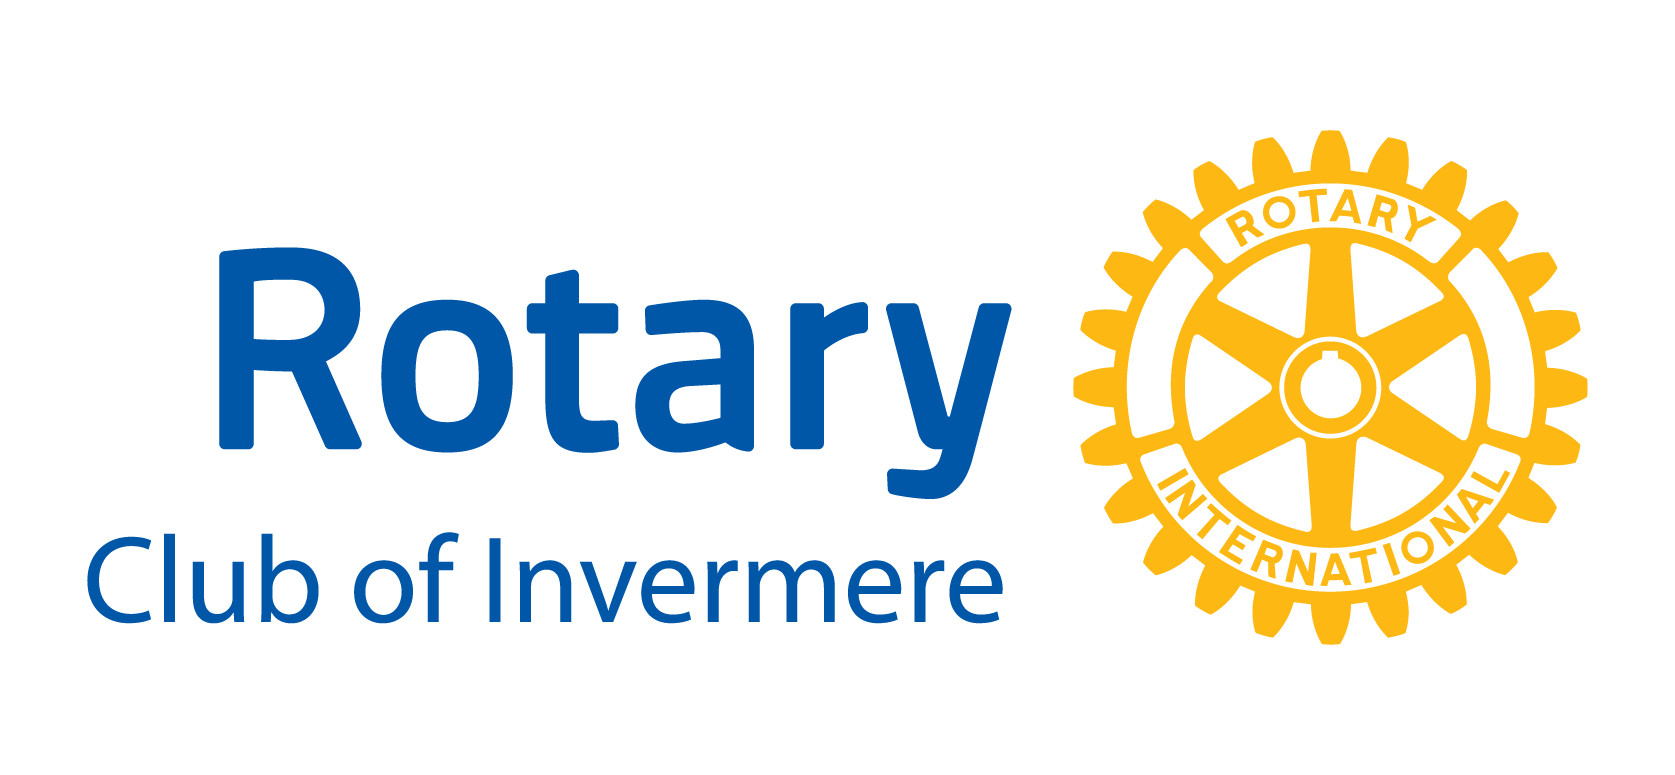 Rotary club of Invermere